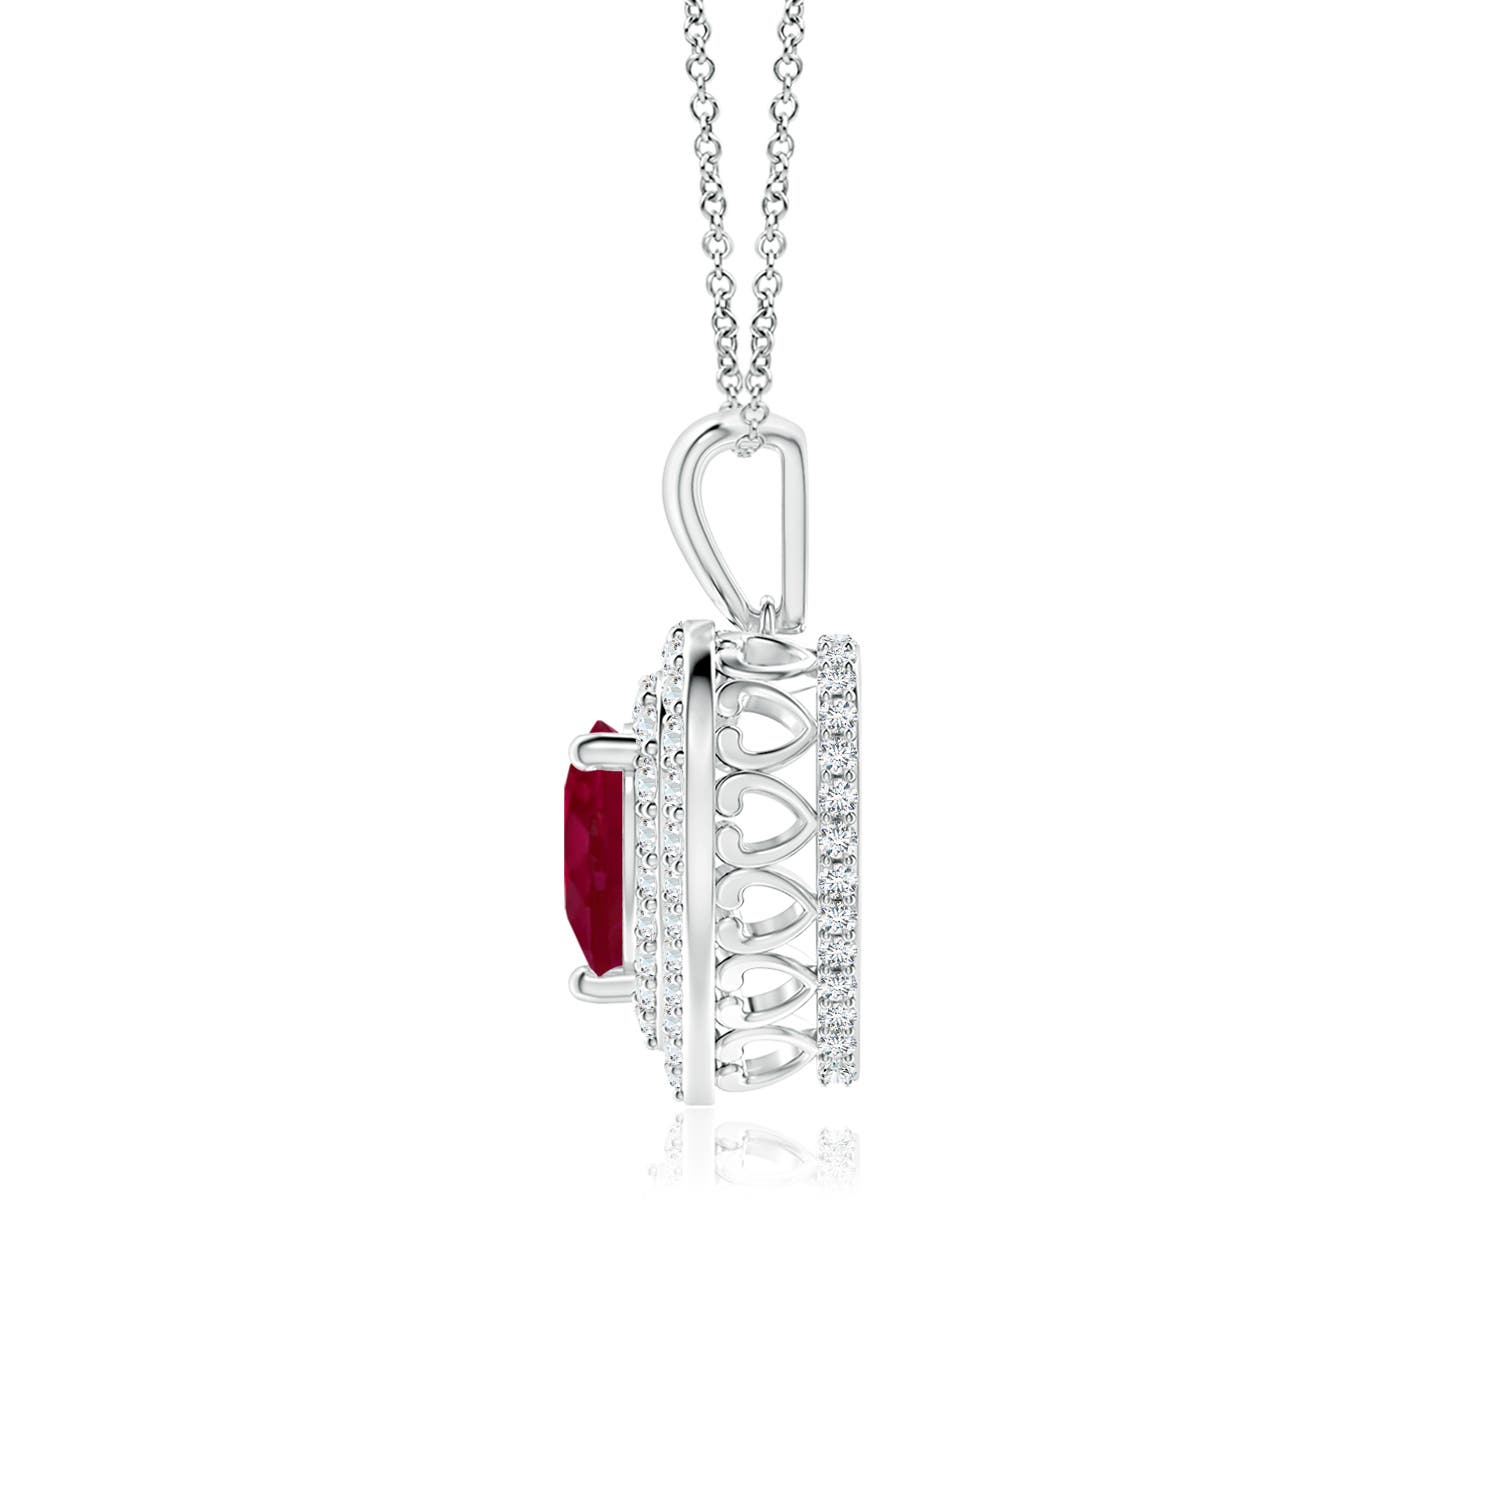 A - Ruby / 1.25 CT / 14 KT White Gold